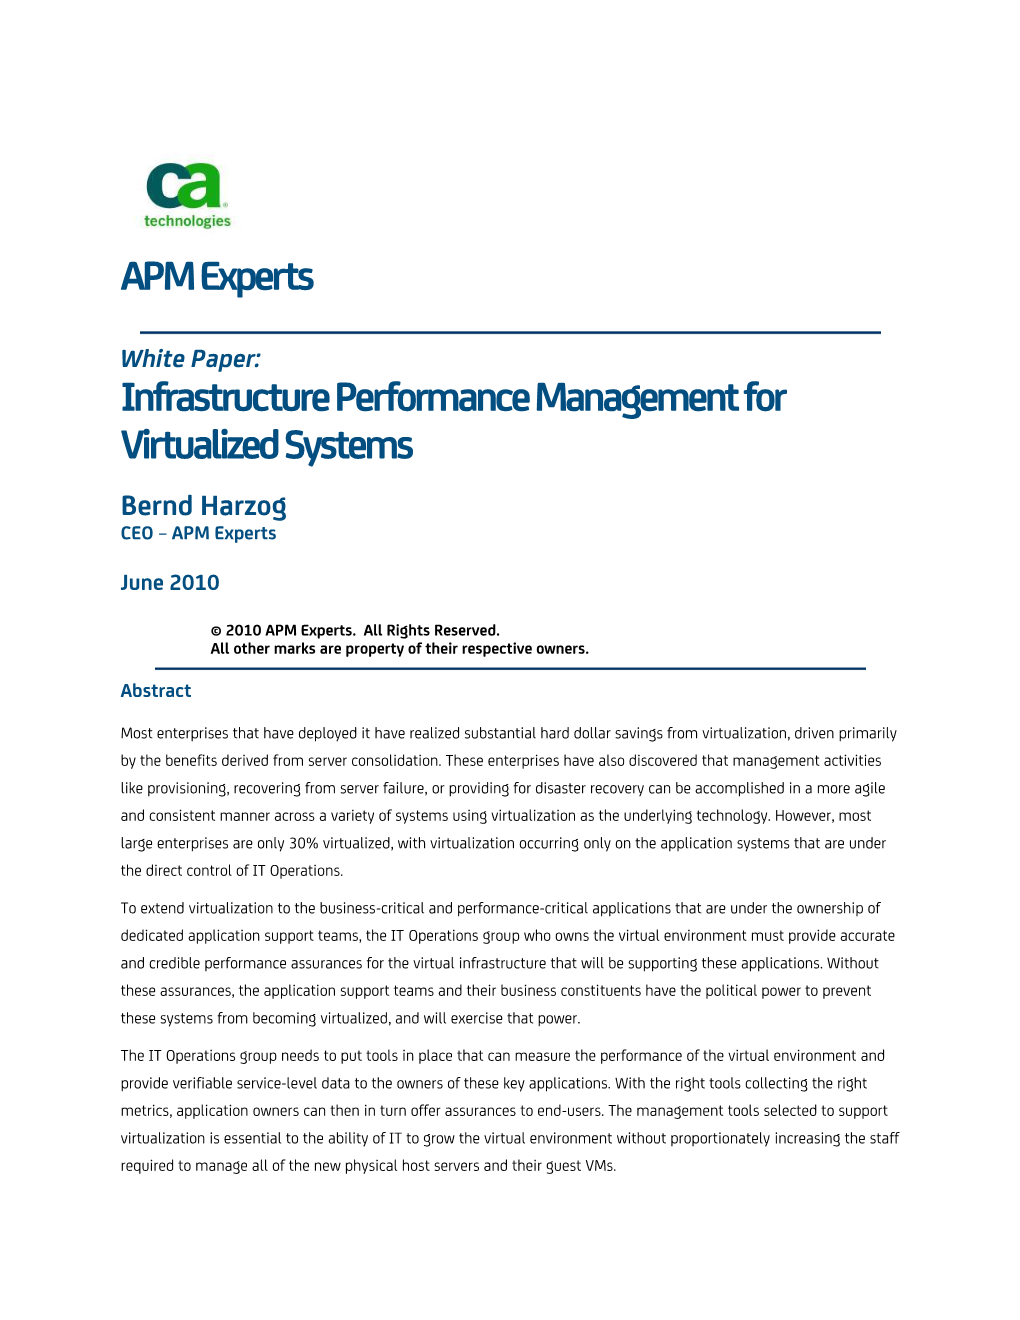 Infrastructure Performance Management for Virtualized Systems